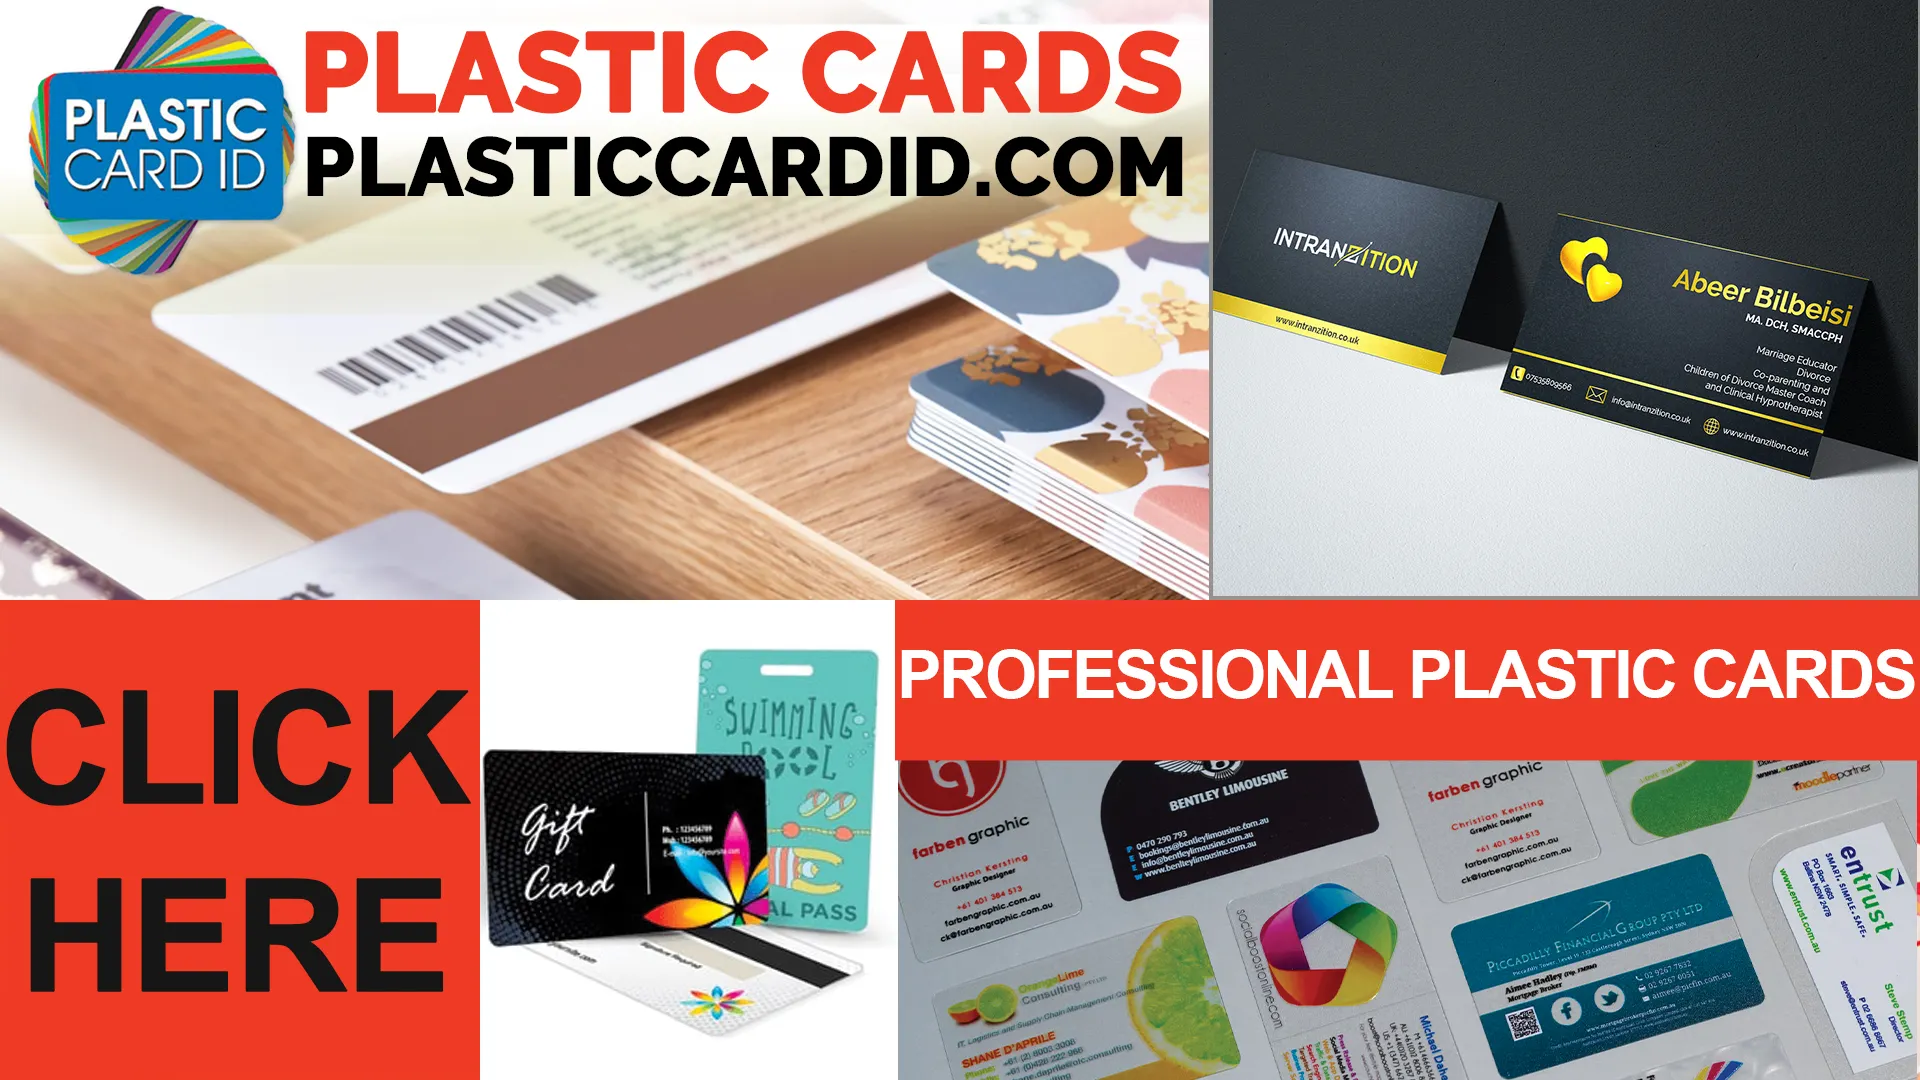 Build Trust with Secure Plastic Cards